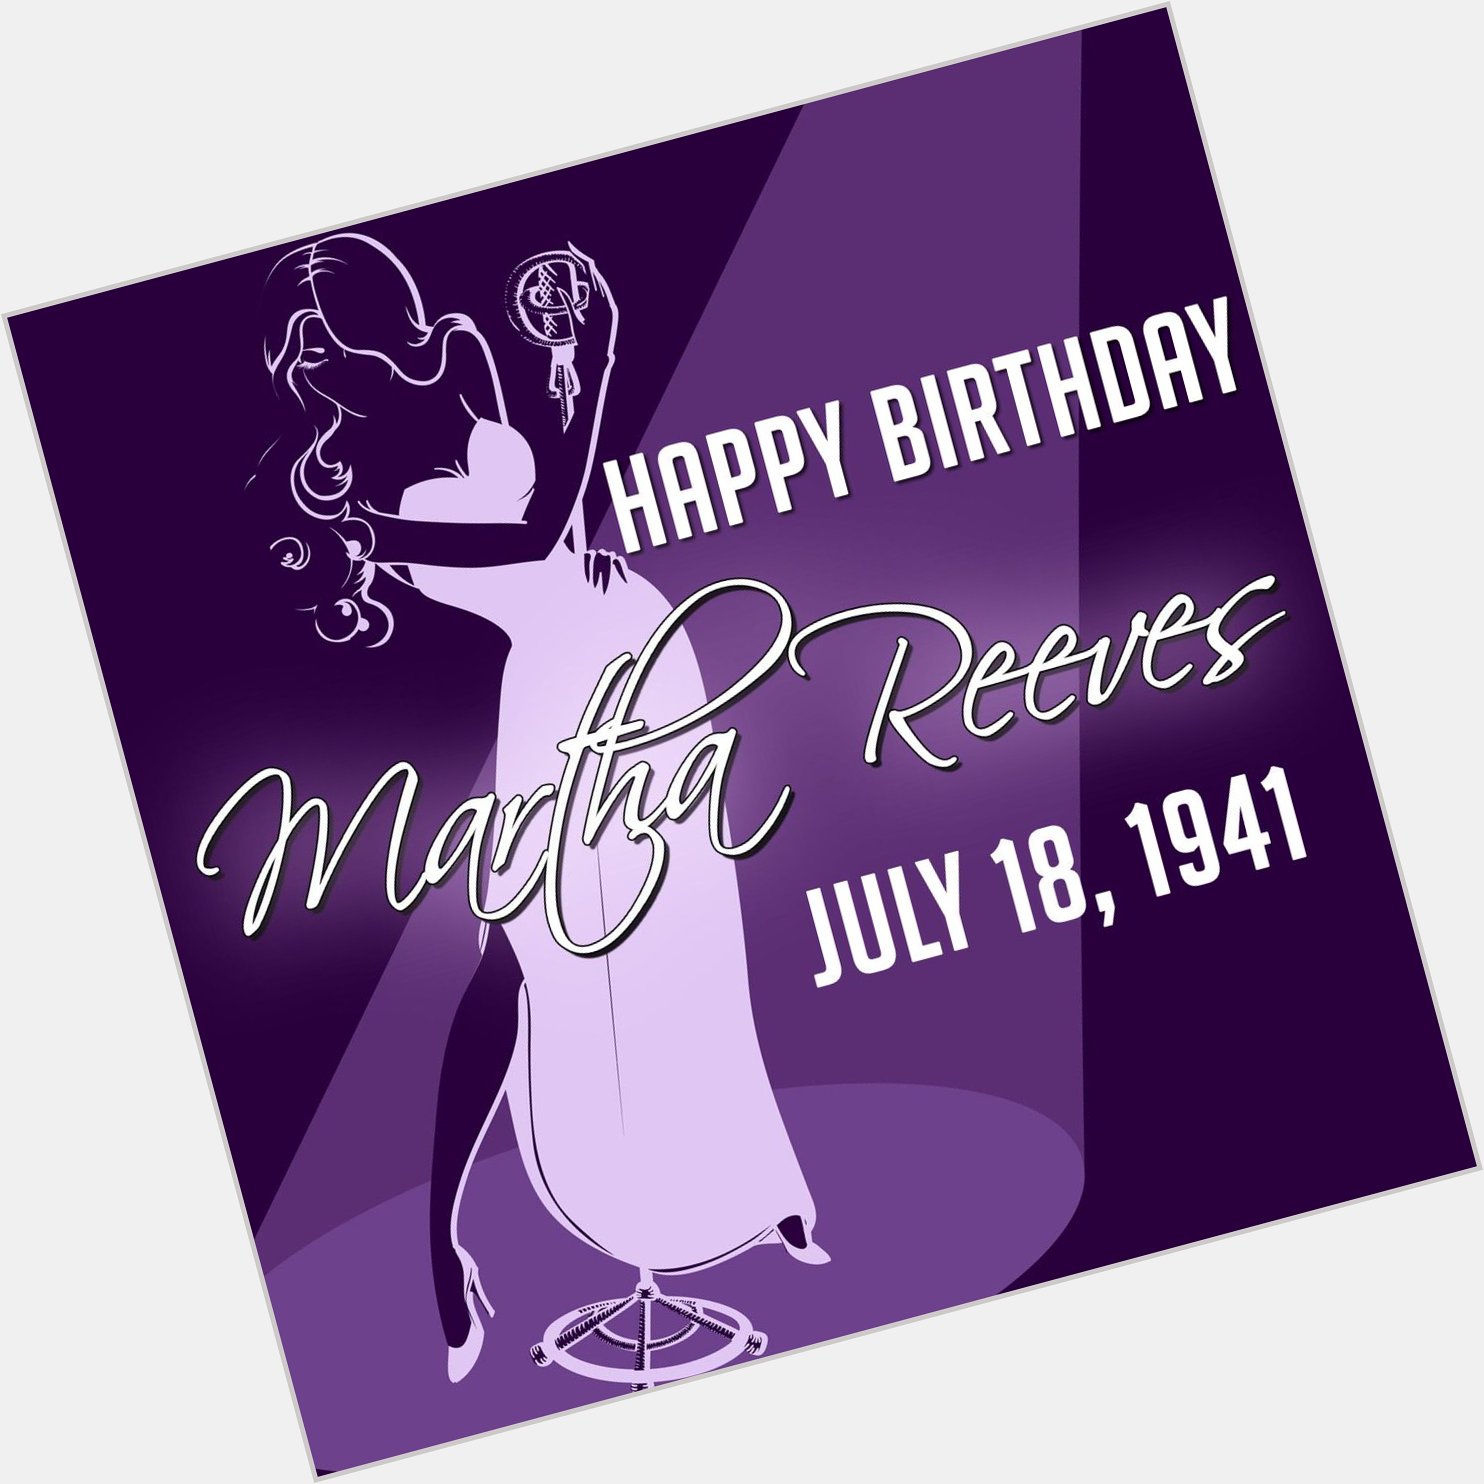 Happy Birthday to Martha Reeves! Get her one of her best known singles \Heatwave\ here!>   